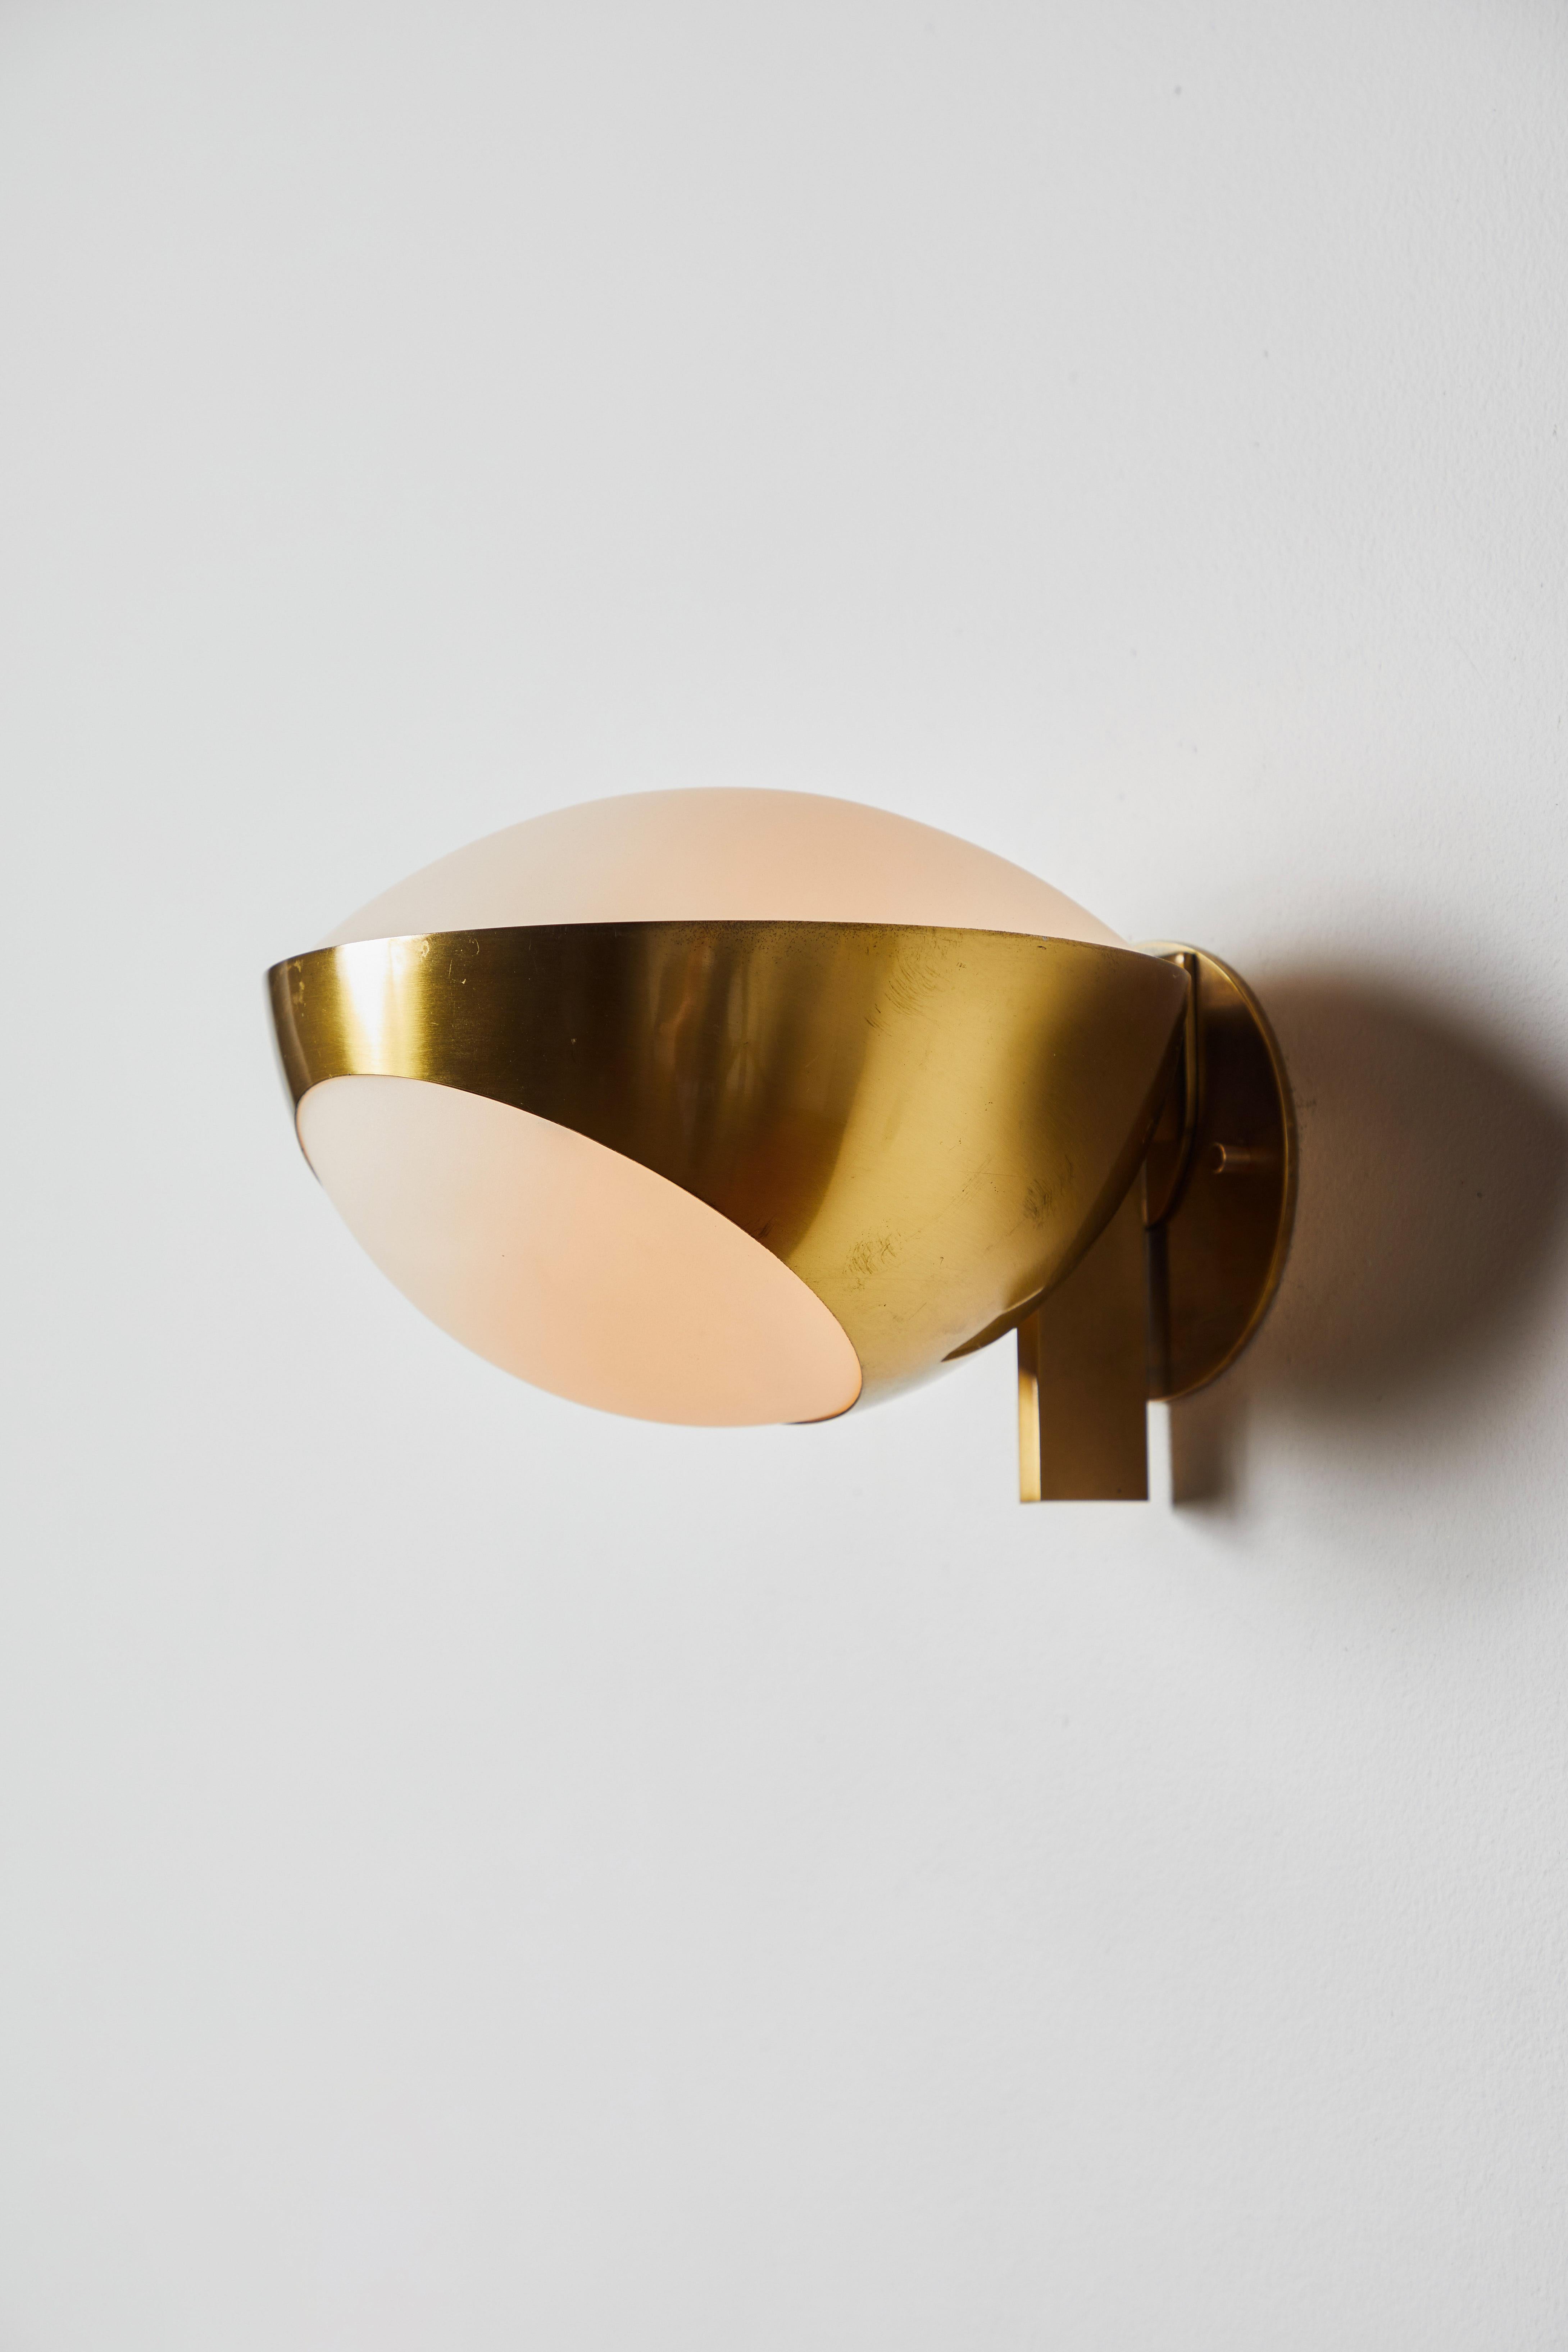 Model No. 1963 Sconce by Max Ingrand for Fontanta Arte 4